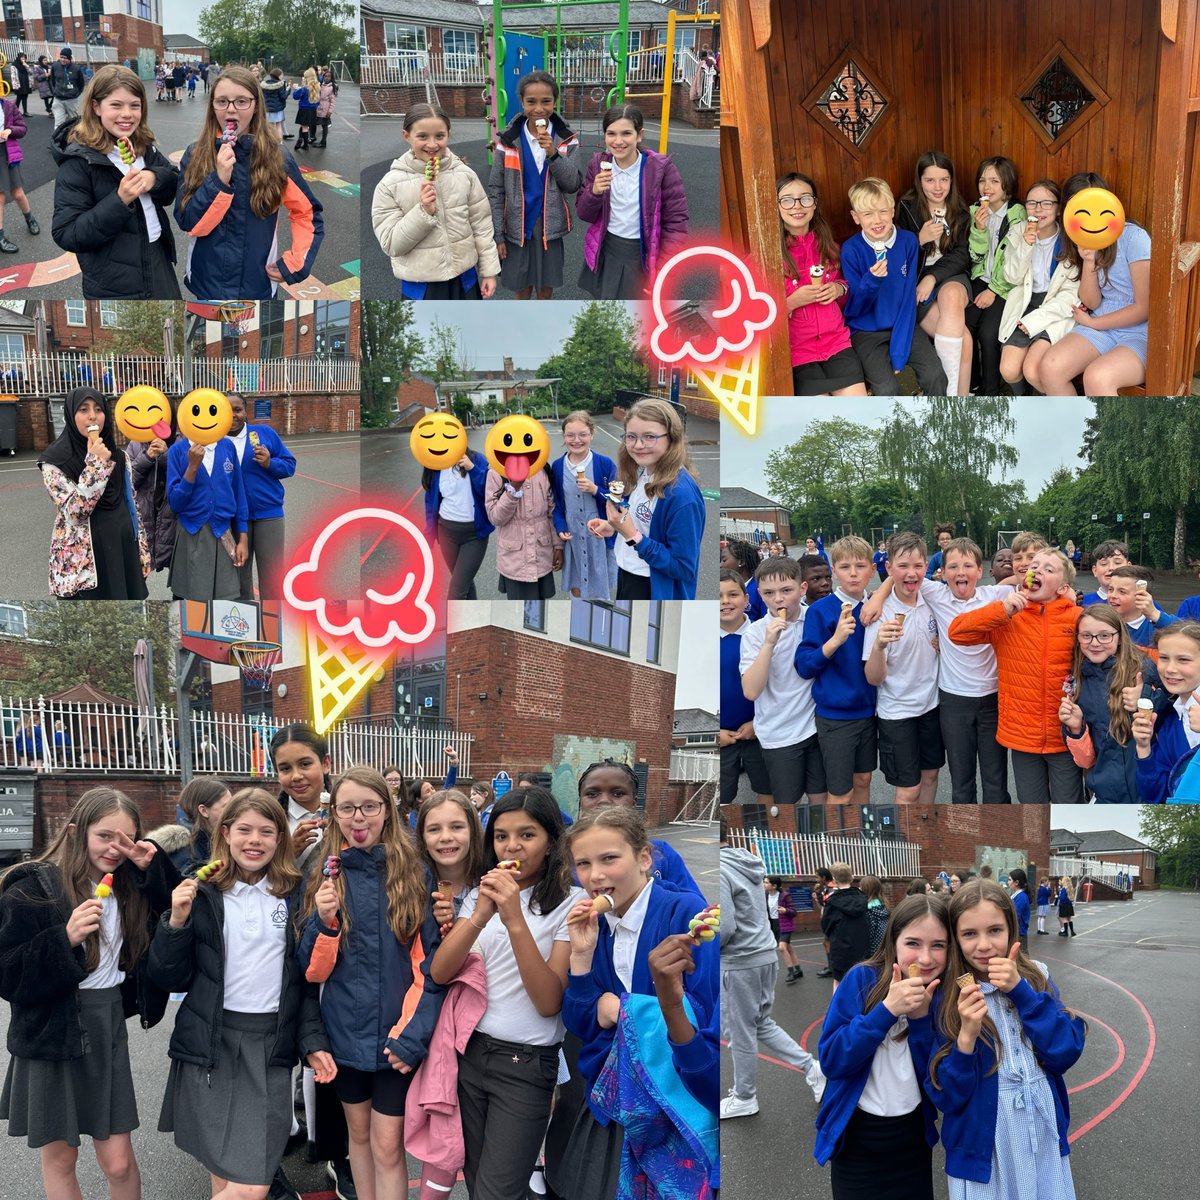 A huge well done to every member of Year 6! A well deserved treat this afternoon to celebrate🍦 @sfsmtweets